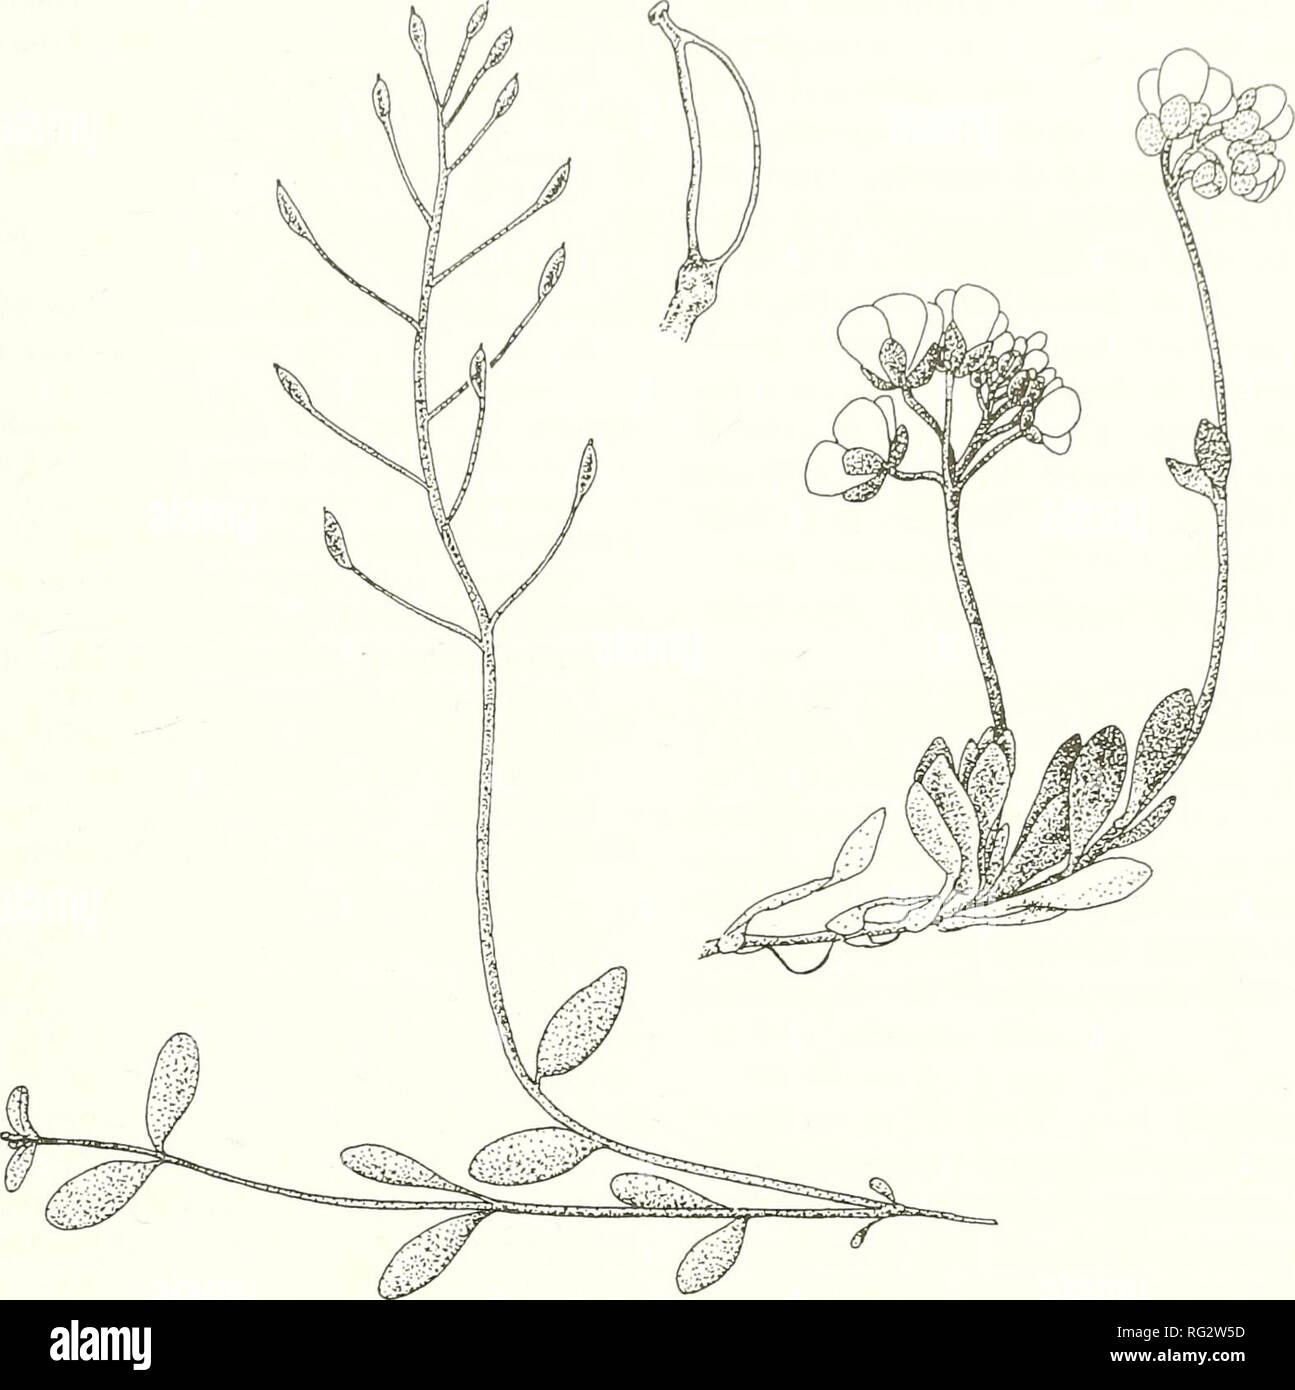 . The Canadian field-naturalist. 1999 Murray and Parker: Taxonomic Disposition of Draba ogilviensis 661. Figure 2. Fruiting and flowering plants of Draba ogilviensis. Drawing by Dominique Collet. therefore have been able to assess the range of geo- graphic and ecological expression of D. sibirica. It is clear that, whether the plants are large or small, whether from the far north (subsp. arctica) or the south (subsp. sibirica), D. sibirica is consistently scapose and has sessile forked hairs on the leaf mar- gins, even when the rest of the plant is glabrous. Those familiar with the circumscrip Stock Photo